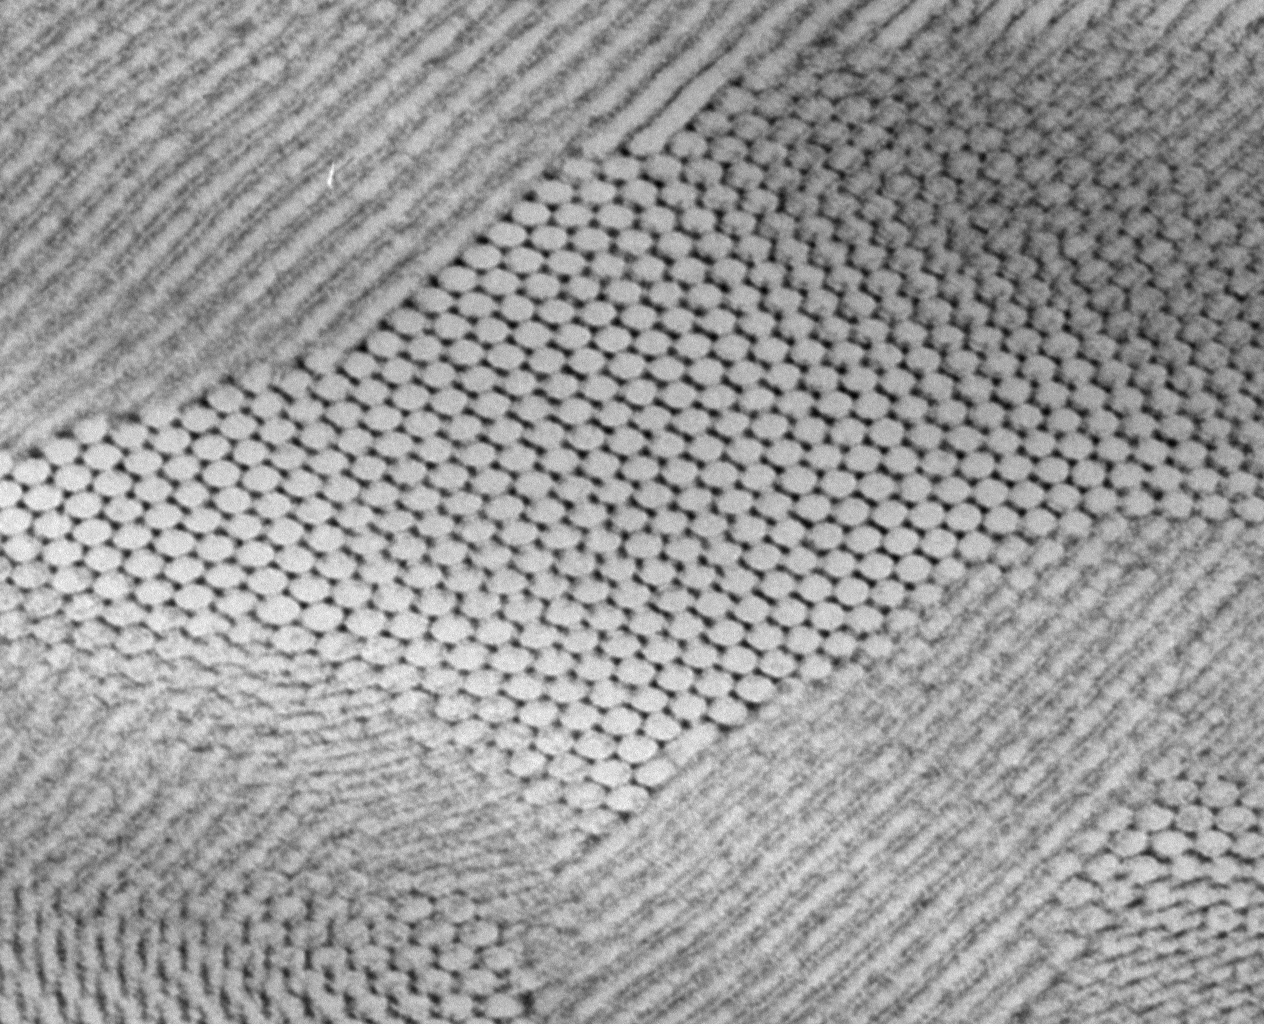 This electron micrograph shows a self-assembled composite in which nanoparticles of lead sulfide have arranged themselves in a hexagonal grid. 